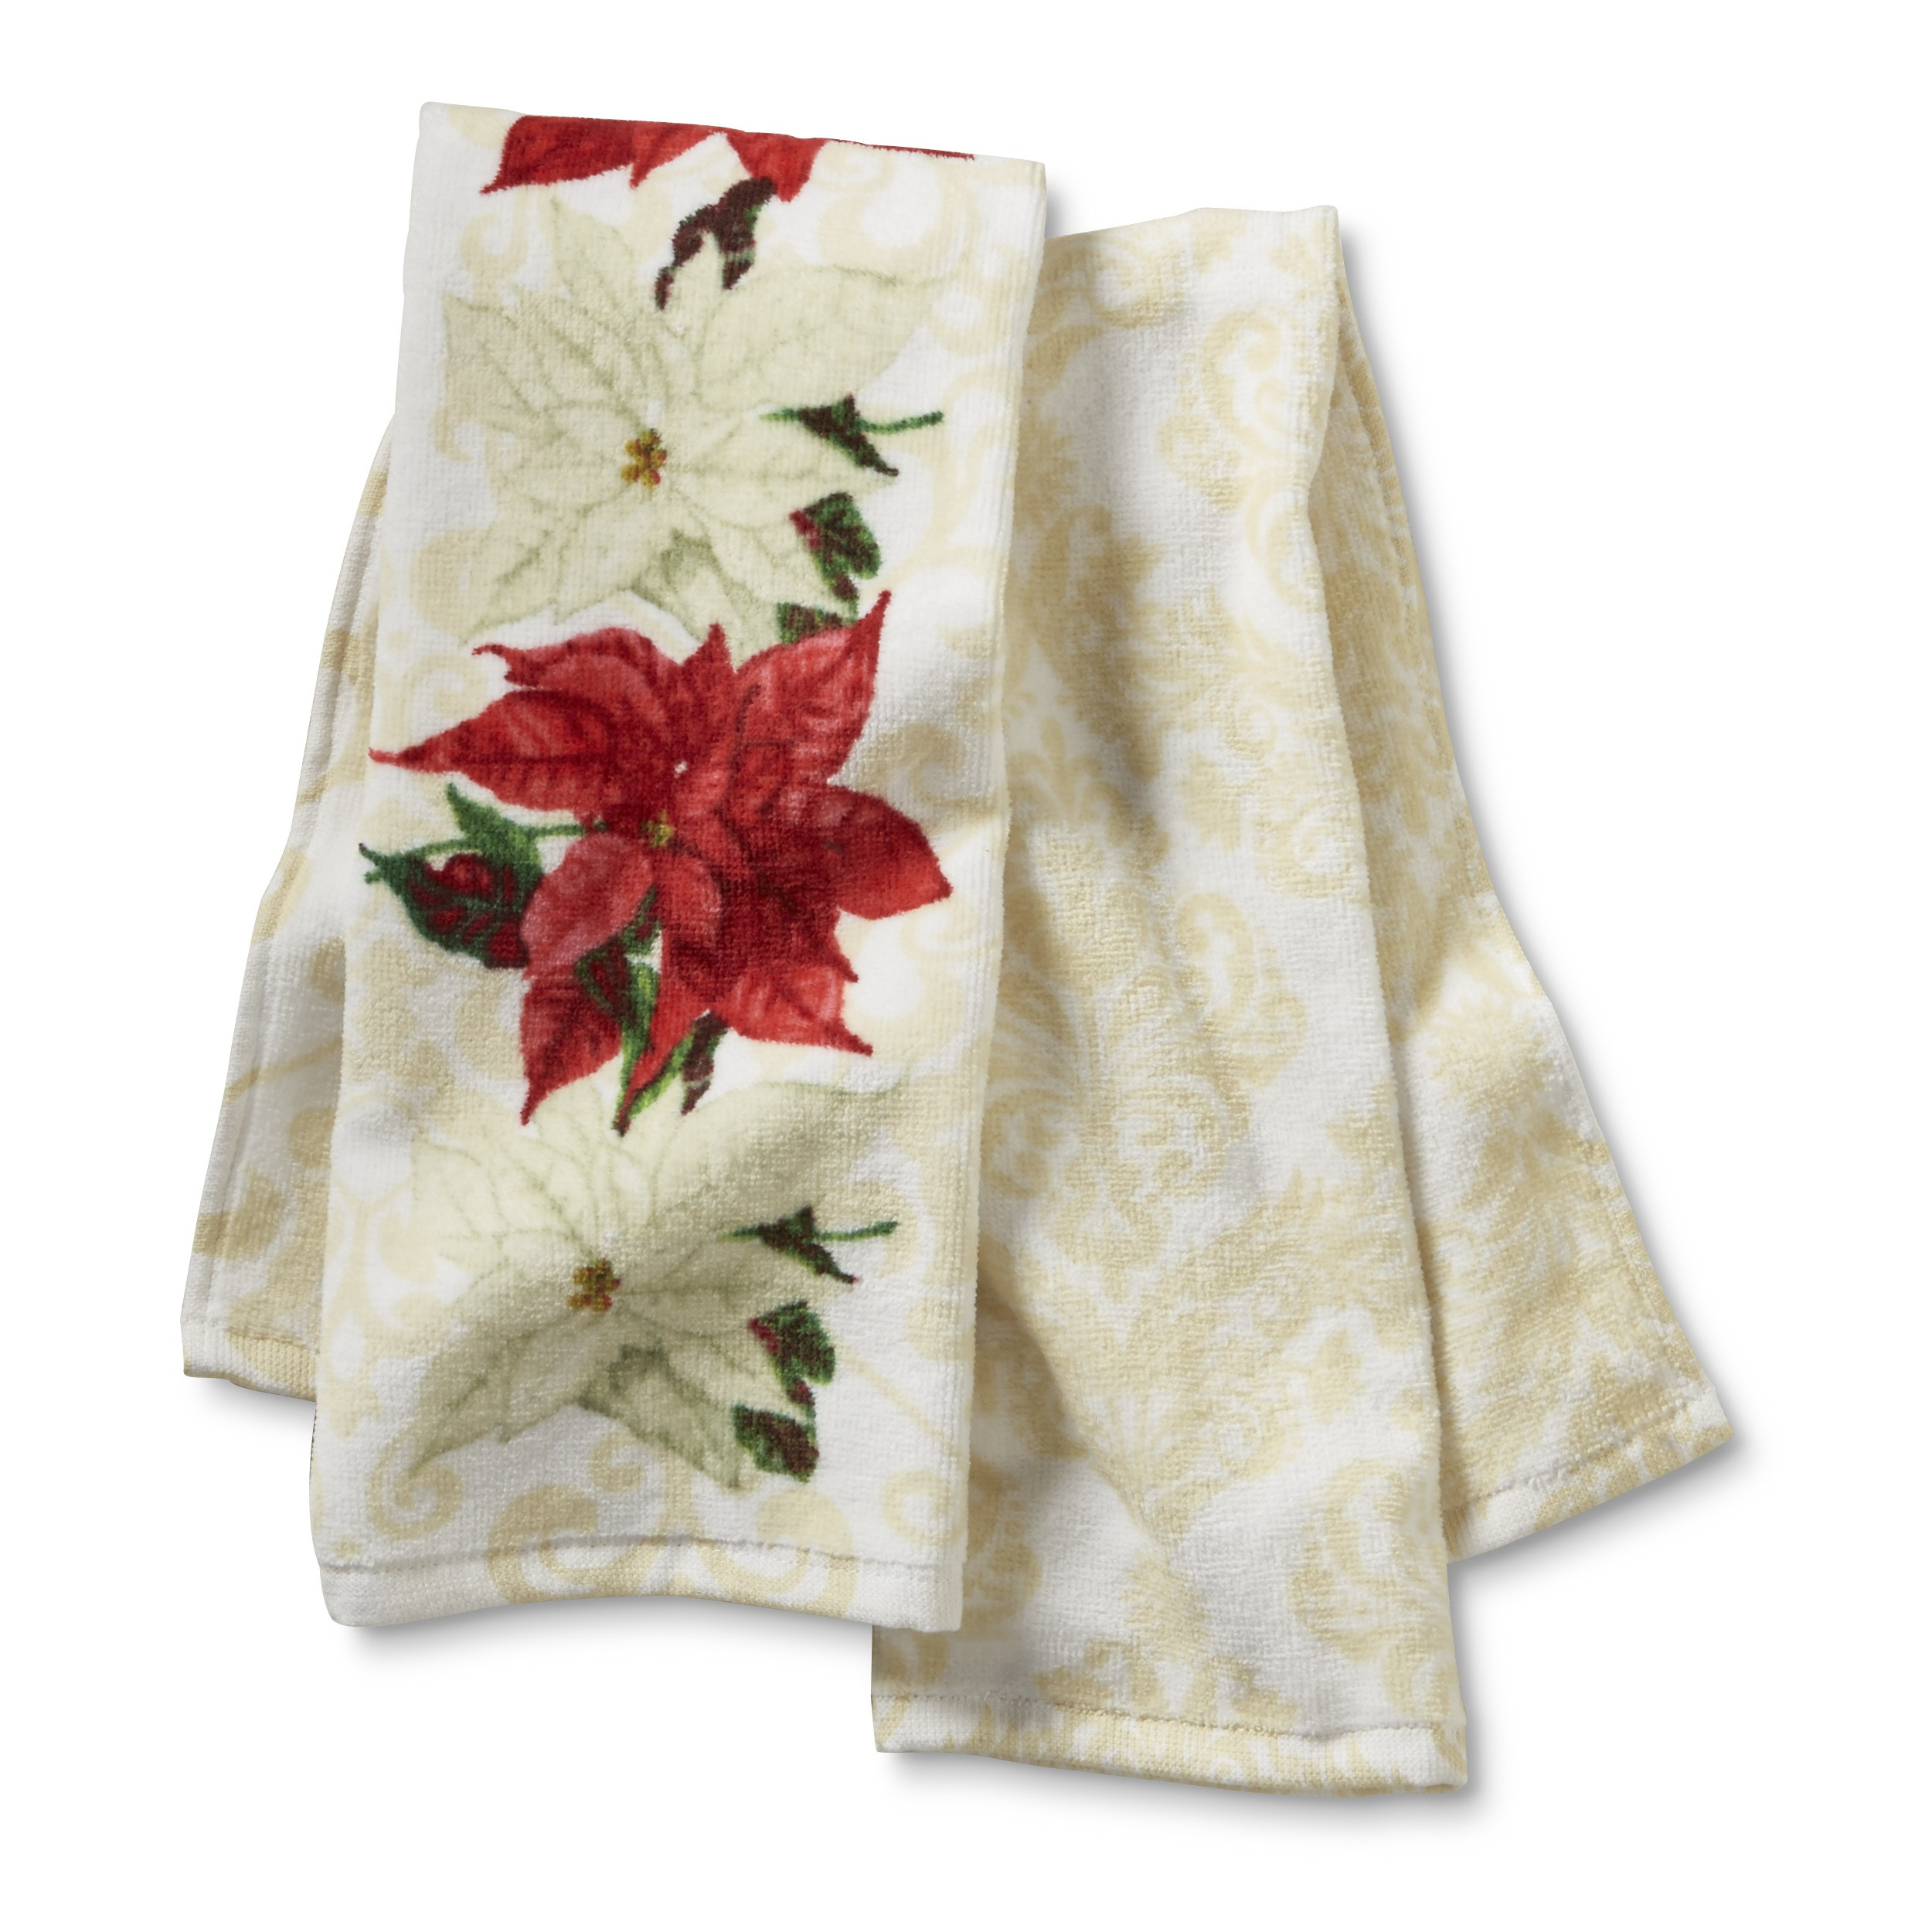 Christmas Kitchen Towels
 Jaclyn Smith 2 Pack Christmas Kitchen Towels Poinsettia